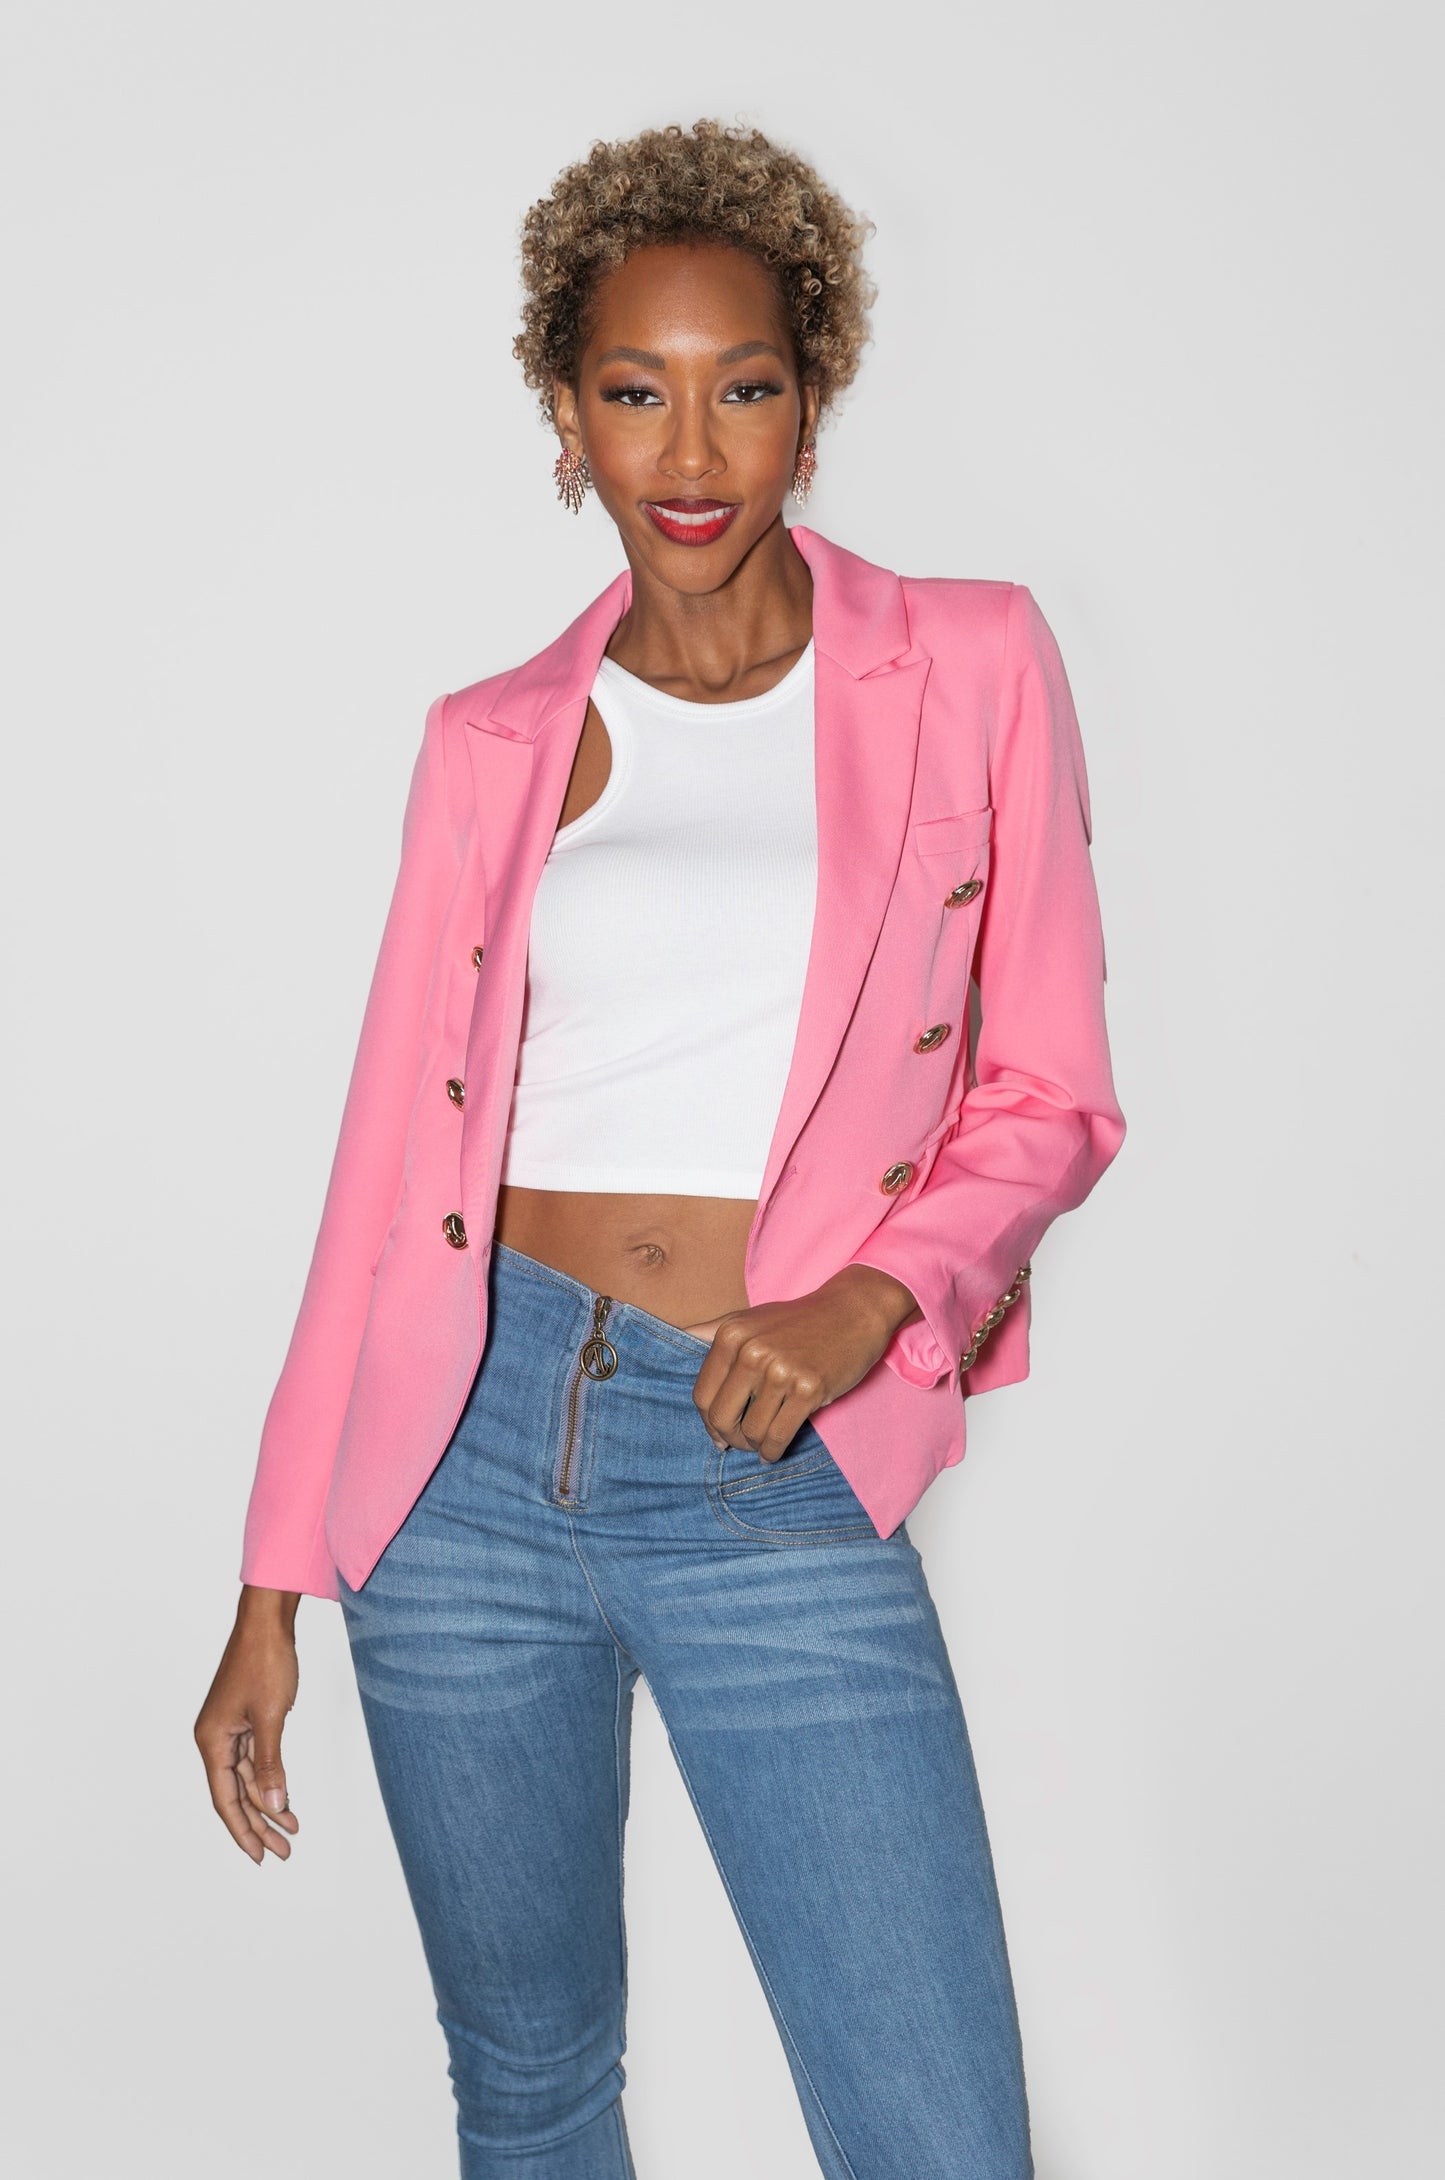 JACKET -The Audrey Double- Breasted  Blazer